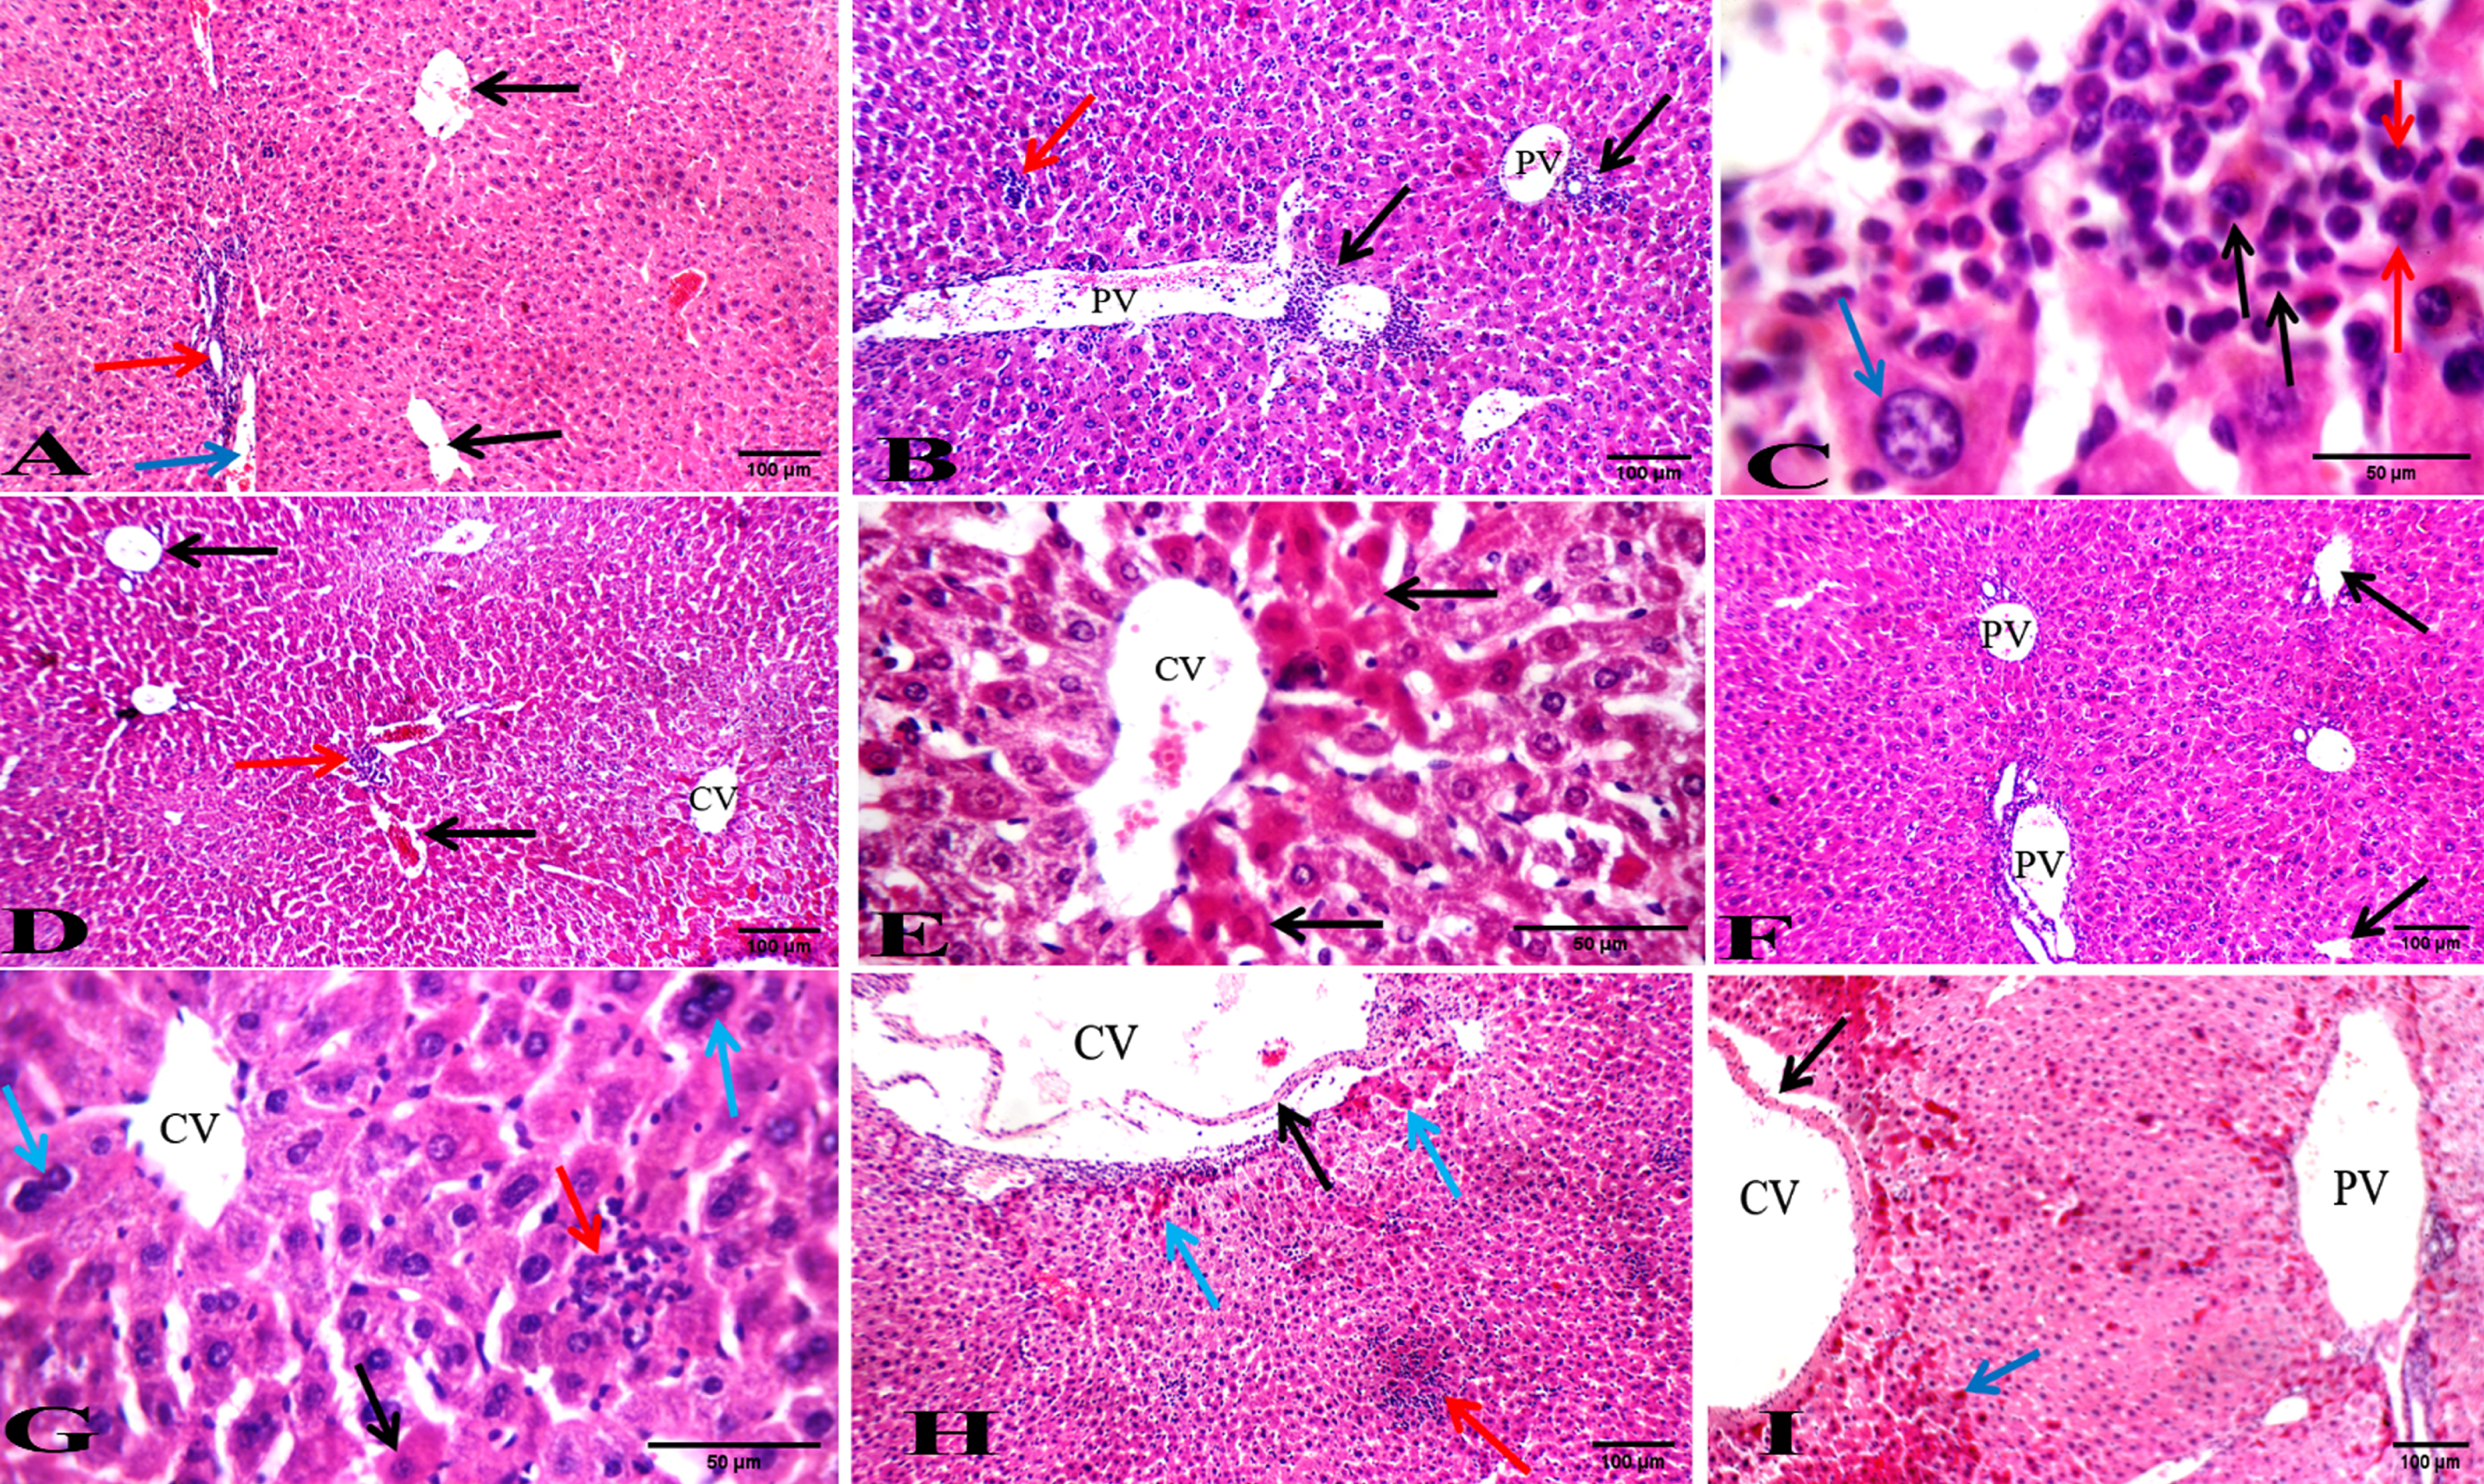 Photos of liver sections stained with hematoxylin and eosin. (A) Normal healthy group showing average CV (black arrows) with average PT showing average BD (red arrow) and average PV (blue arrow) (H&E x200). (B) DMBA-treated group showing dilated PV with marked leukemic infiltrate in PT (black arrows) and in blood sinusoids (red arrow) (H&E x200). (C) DMBA-treated group showing markedly pleomorphic leukemic cells (black arrows) with large nuclei and prominent eosinophilic nucleoli (red arrows), and preserved hepatocytes in the interface area (blue arrow) (H&E x1000). (D) BFB -treated 1/10 group showing average CV and mildly dilated PV (black arrows) with mild leukemic infiltrate in PT (red arrow) (H&E x200). (E) BFB -treated 1/10 group showing dilated CV with markedly apoptotic hepatocytes in perivenular area (black arrows) (H&E x400). (F) BFB -treated 1/5 group showing CV (black arrow) and mildly dilated PV (H&E x200). (G) BFB -treated 1/5 group showing average CV with scattered apoptotic (black arrow) and bi-nucleated hepatocytes (blue arrow) with mild leukemic infiltrate (red arrow) (H&E x400). (H) BFB control 1/10 group showing dilated CV with detached lining (black arrow) and mildly apoptotic hepatocytes in peri-venular area (blue arrow) with intra-parenchymal inflammatory infiltrate (red arrow) (H&E x200). (I) BFB control 1/5 group showing dilated CV with detached lining (black arrow) and dilated PV with apoptotic hepatocytes more marked in peri-venular area (blue arrow) (H&E x200).